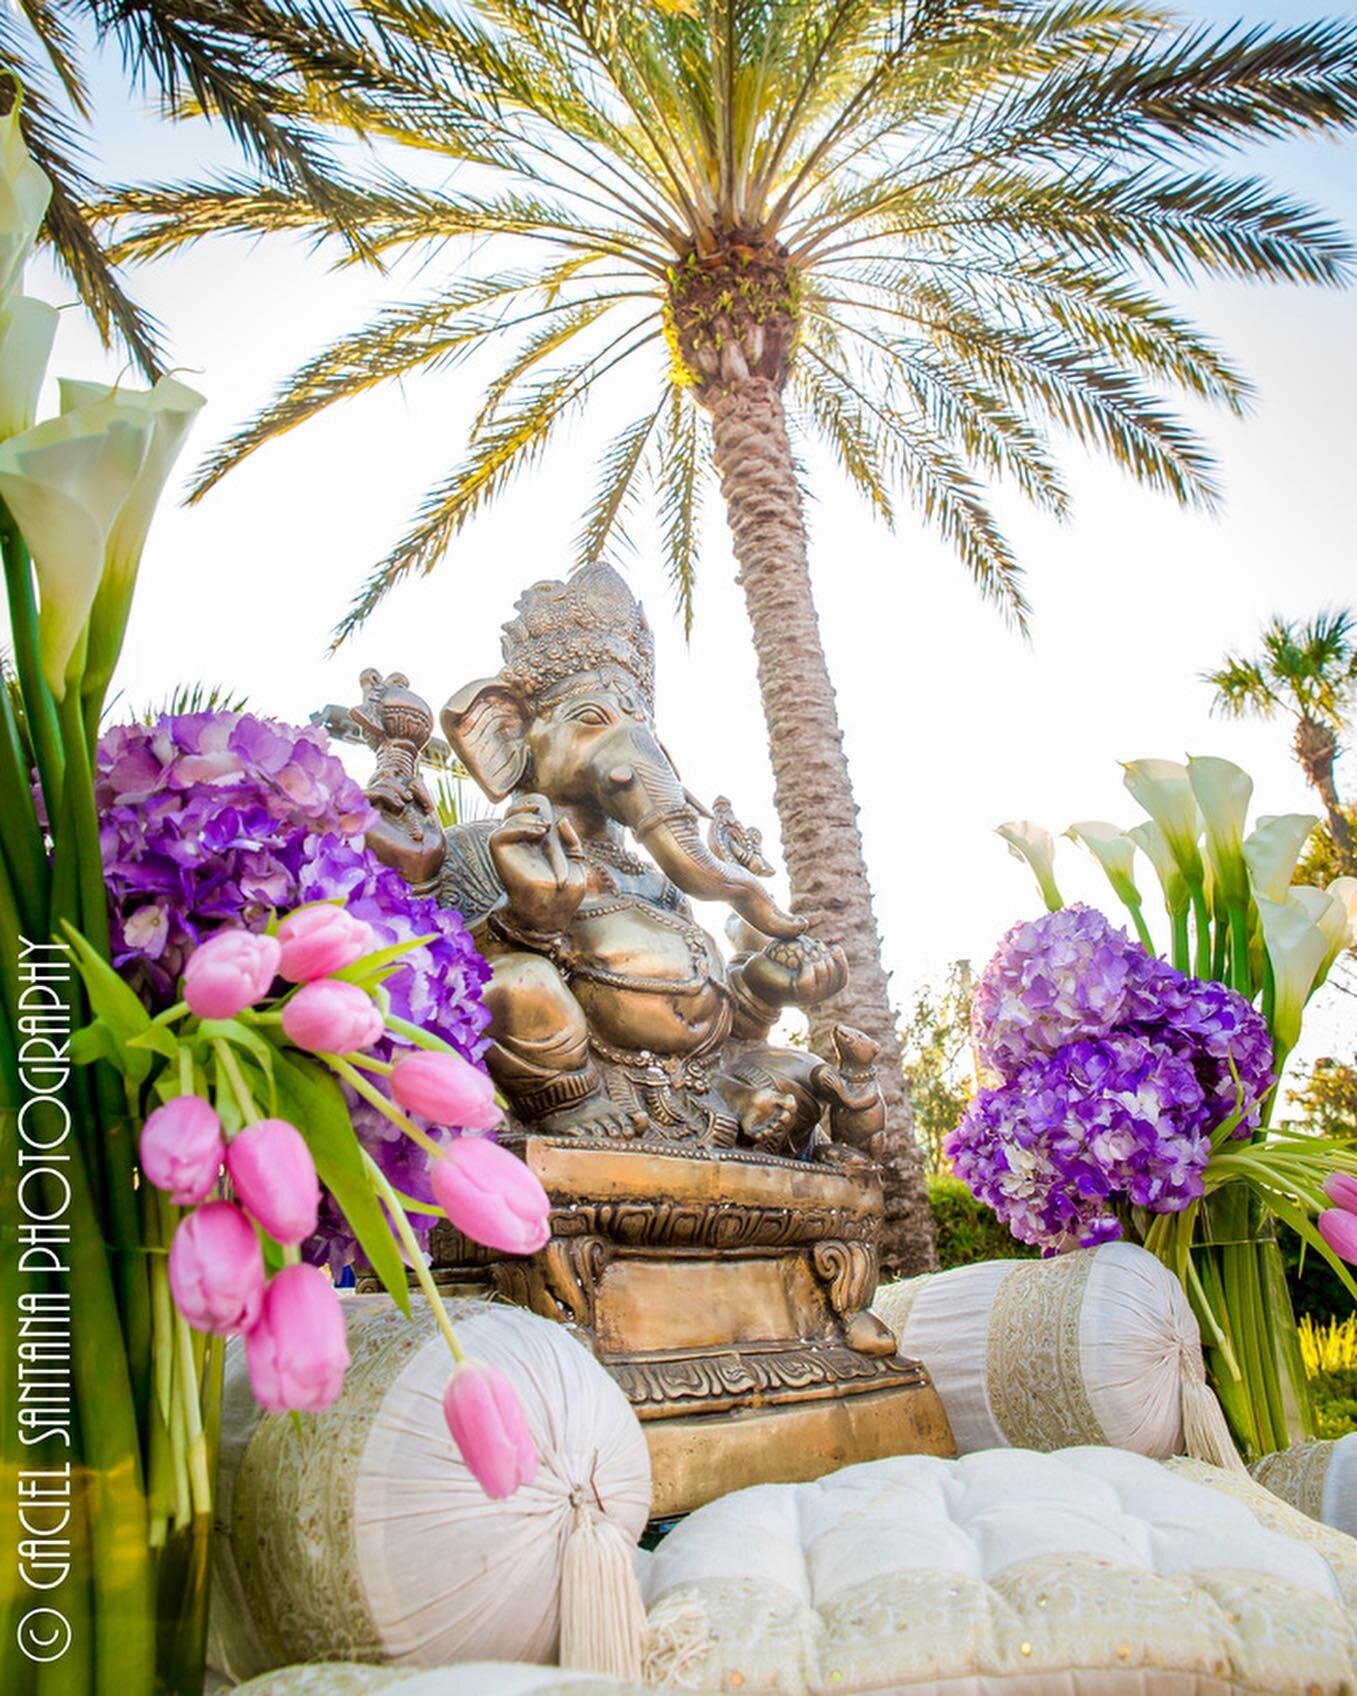 Lord Ganesh:  The revered Hindu God who is remover of obstacles is always prominently placed at @utopian_events adorned with florals!  Presented here with fresh hydrangeas, calla lilies and tulips at a Sunny Florida wedding!! Amazing photos by @gacie